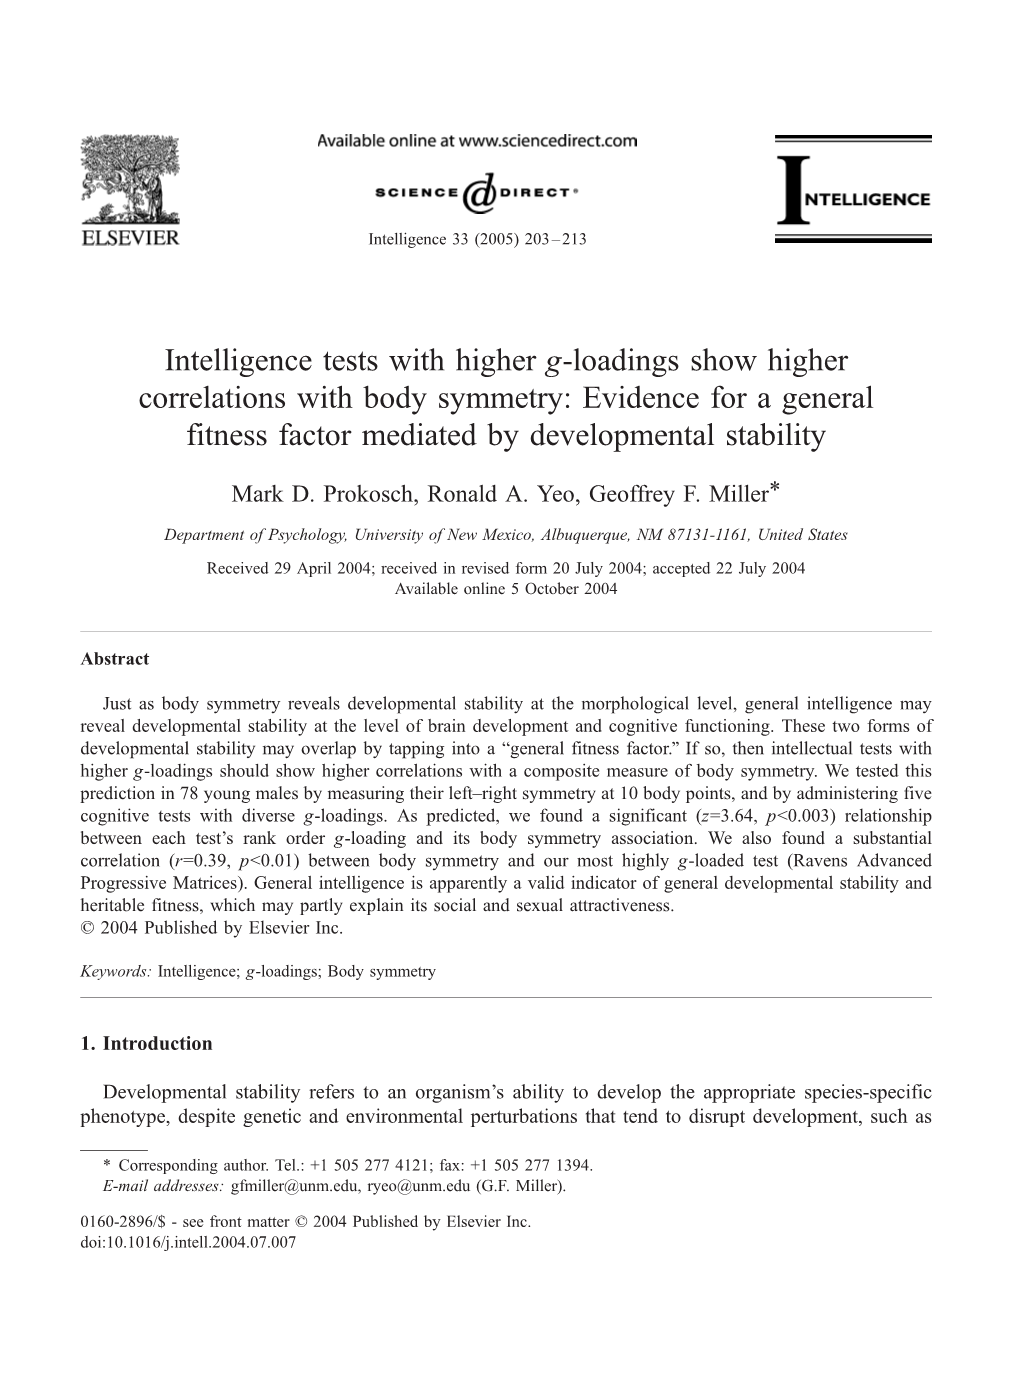 Intelligence Tests with Higher G-Loadings Show Higher Correlations with Body Symmetry: Evidence for a General Fitness Factor Mediated by Developmental Stability